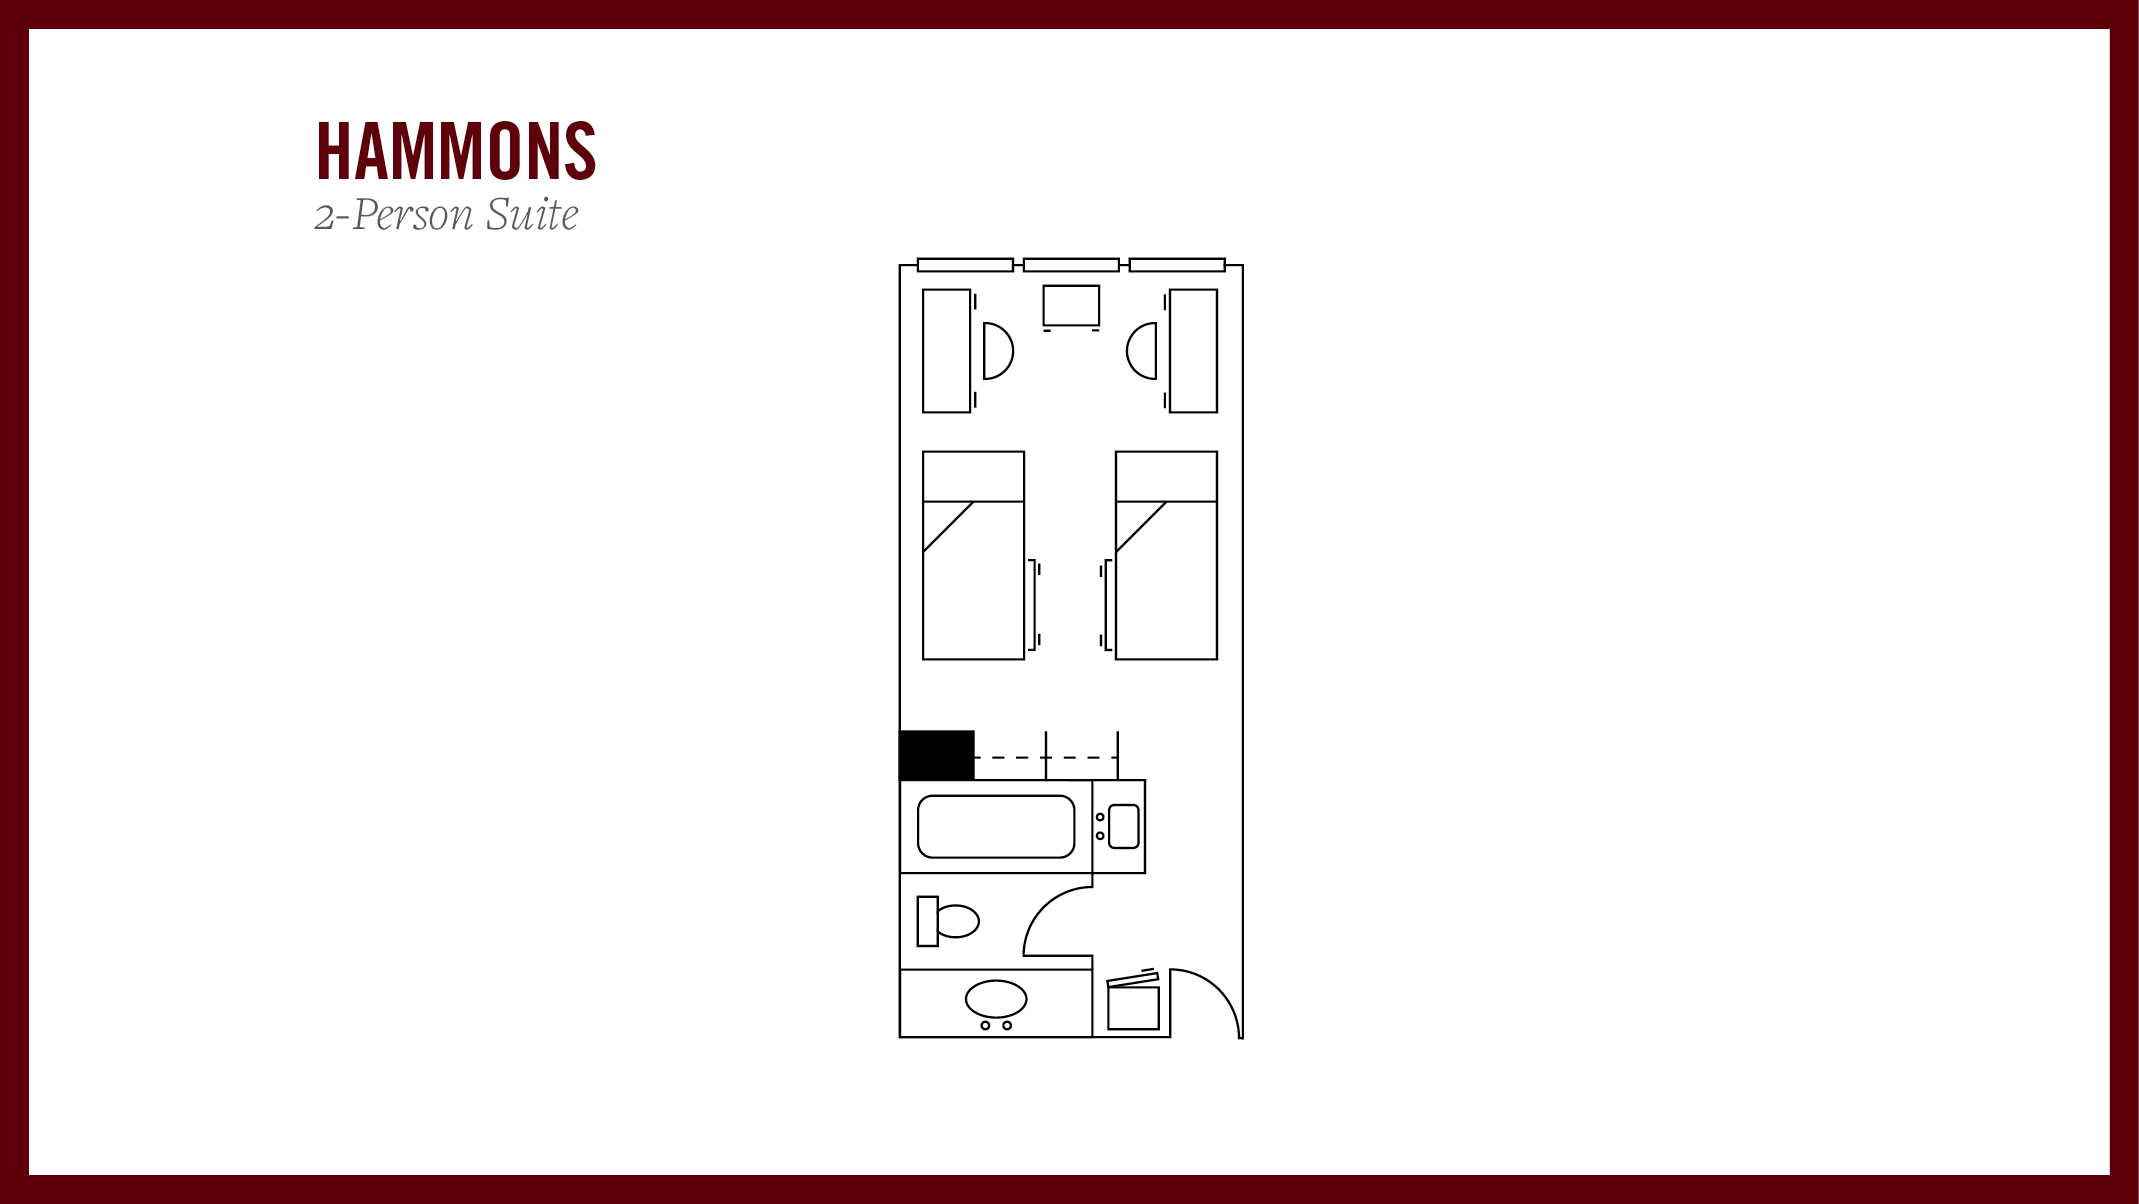 Hammons House 2-person suite layout